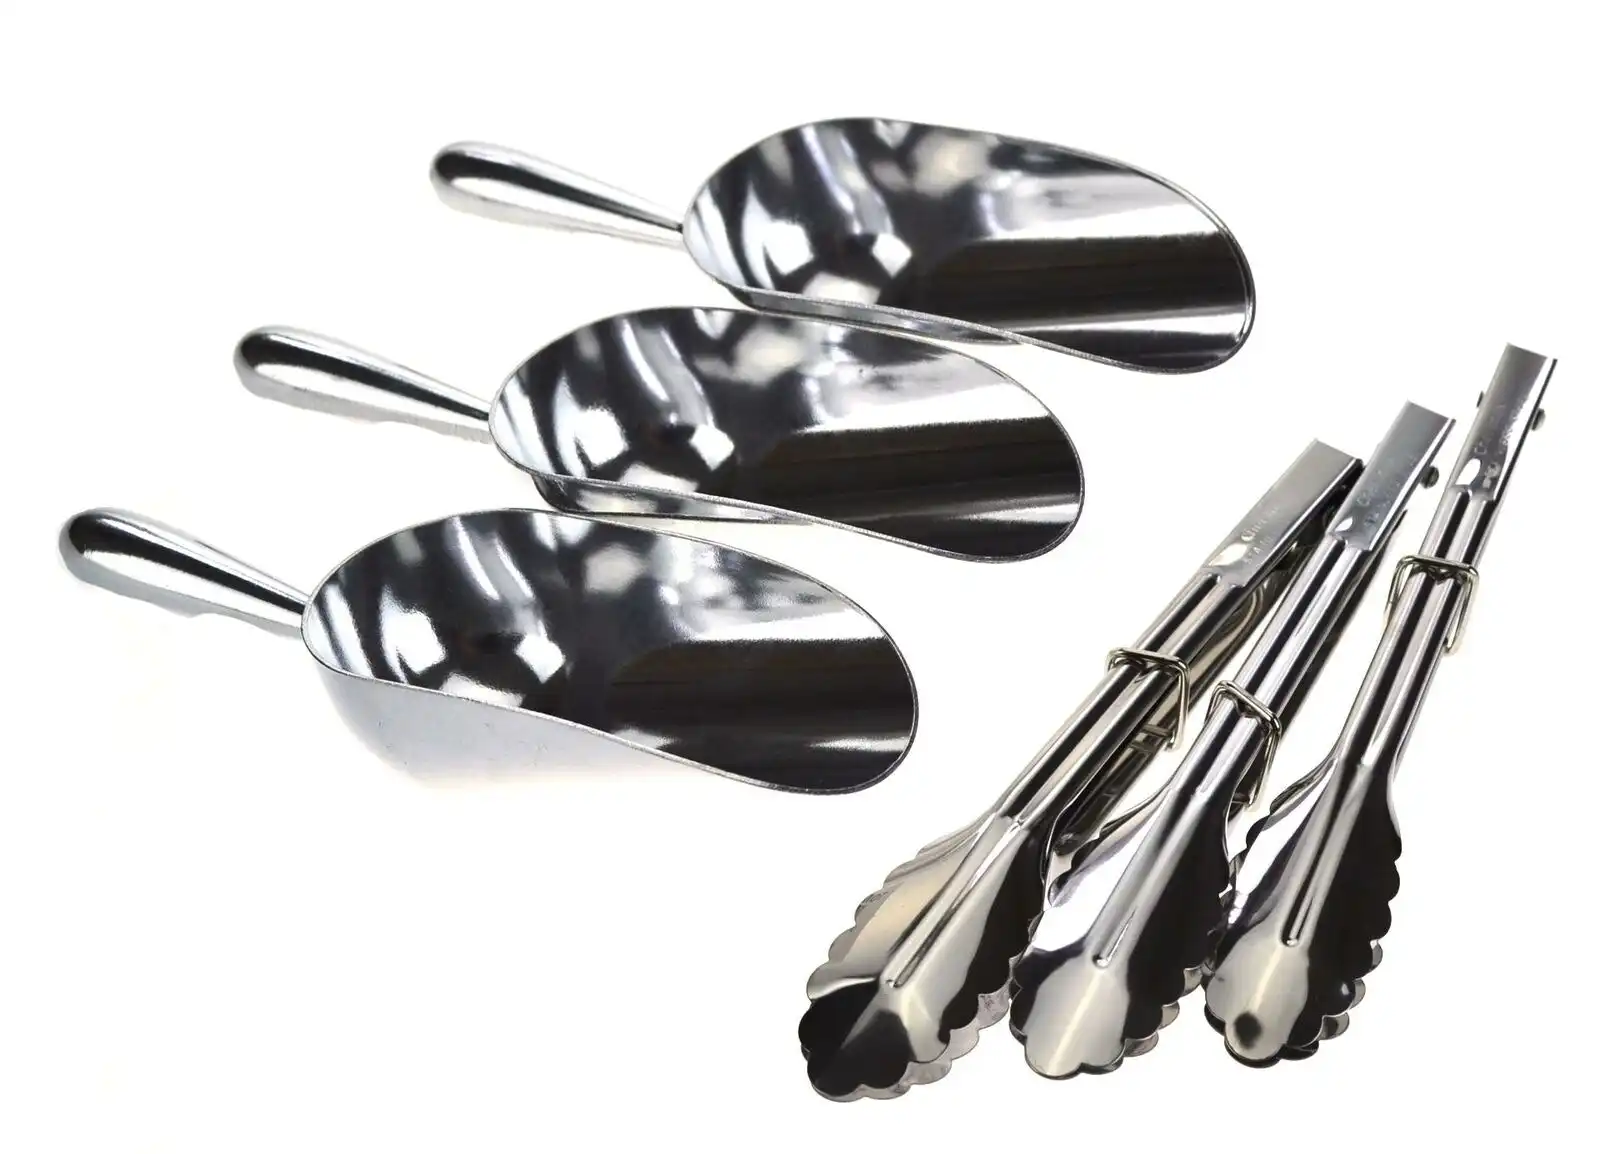 LOLLY BAR PACK 6 PACK - 3 Tongs - 3 Scoops